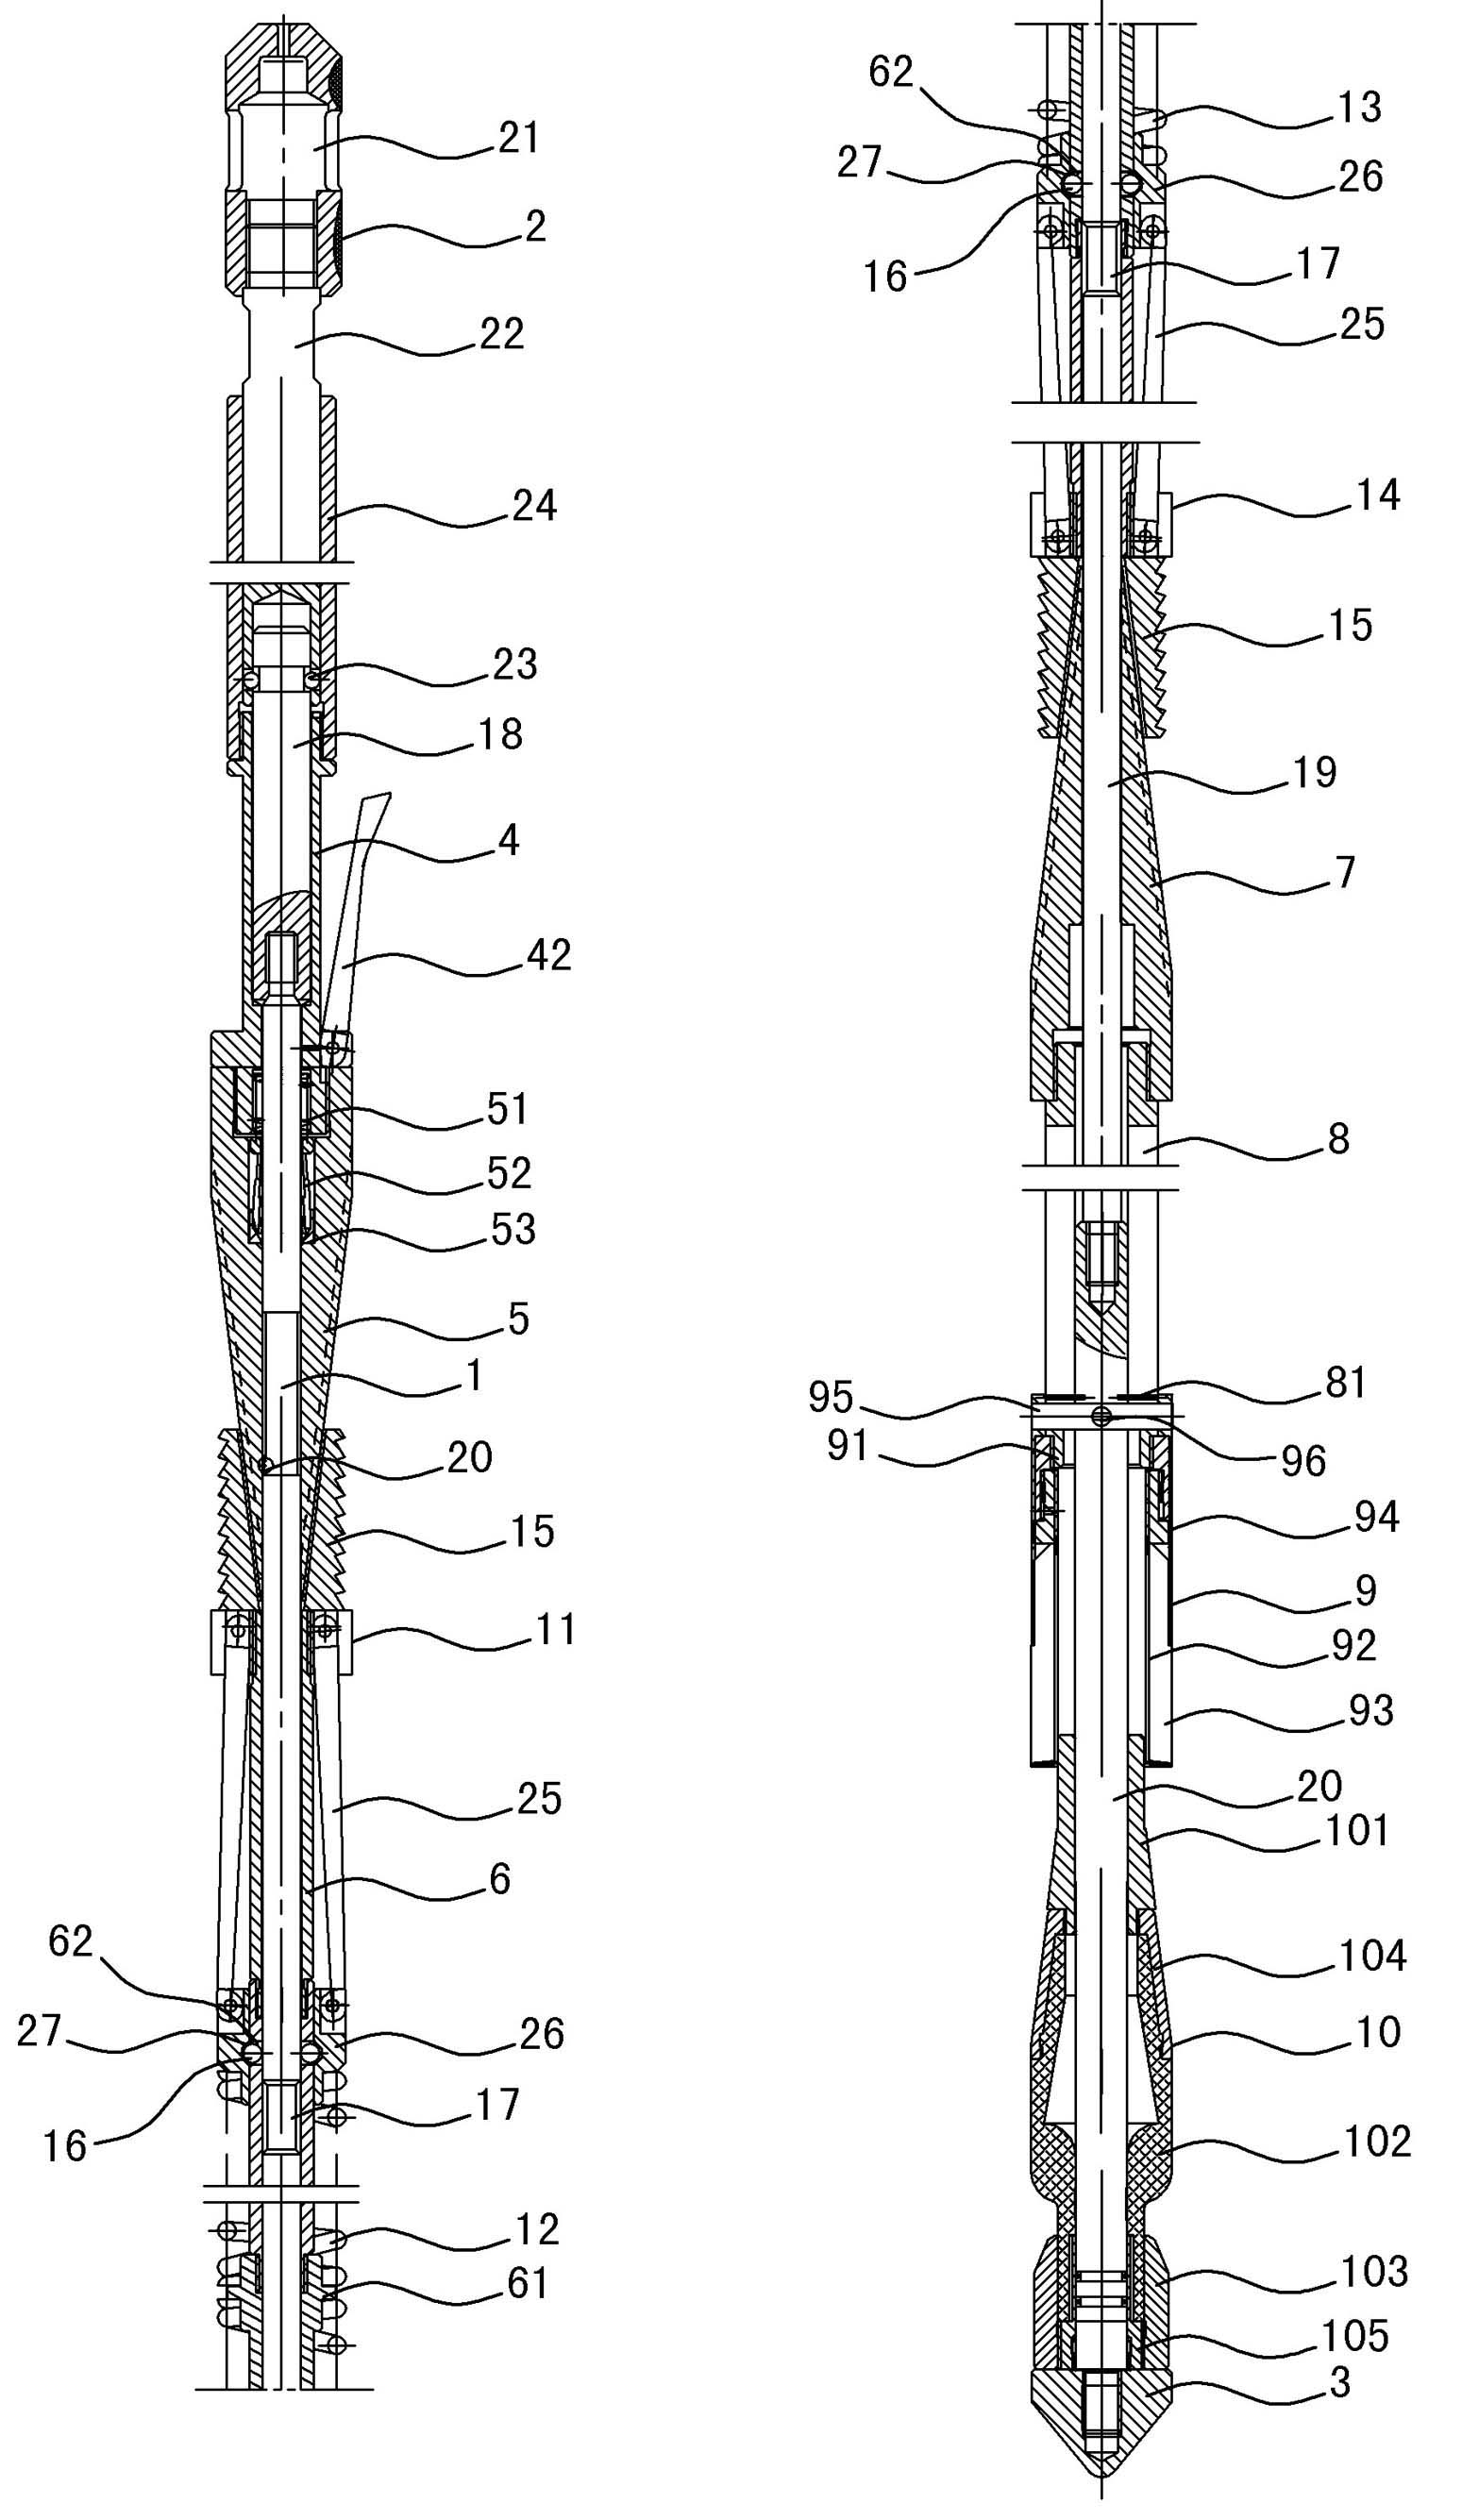 Undersize-hole oil pipe plugging device